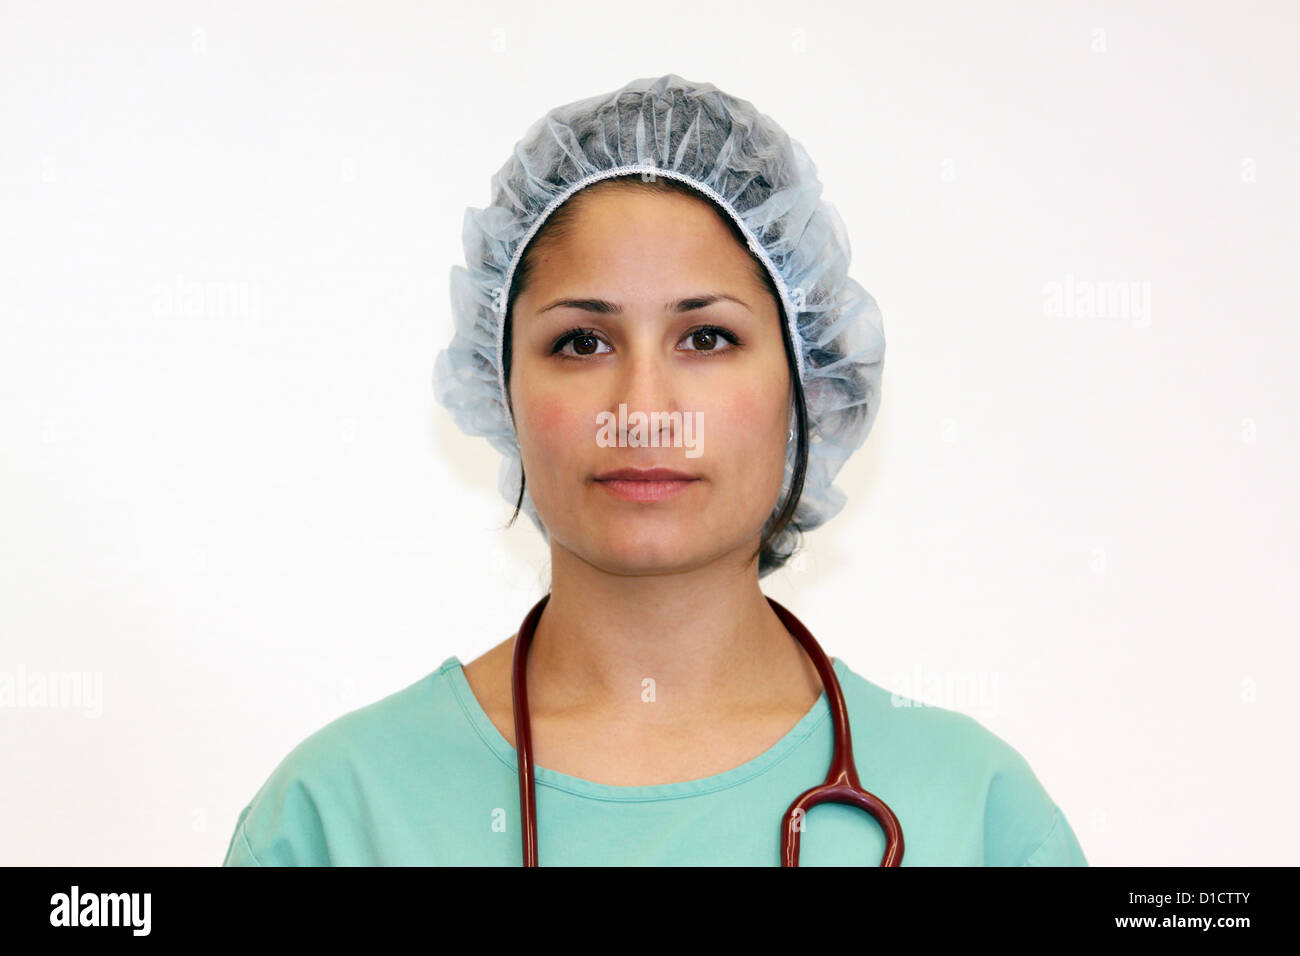 Berlin, Germany, young physican in tunic with surgical cap and stethoscope Stock Photo